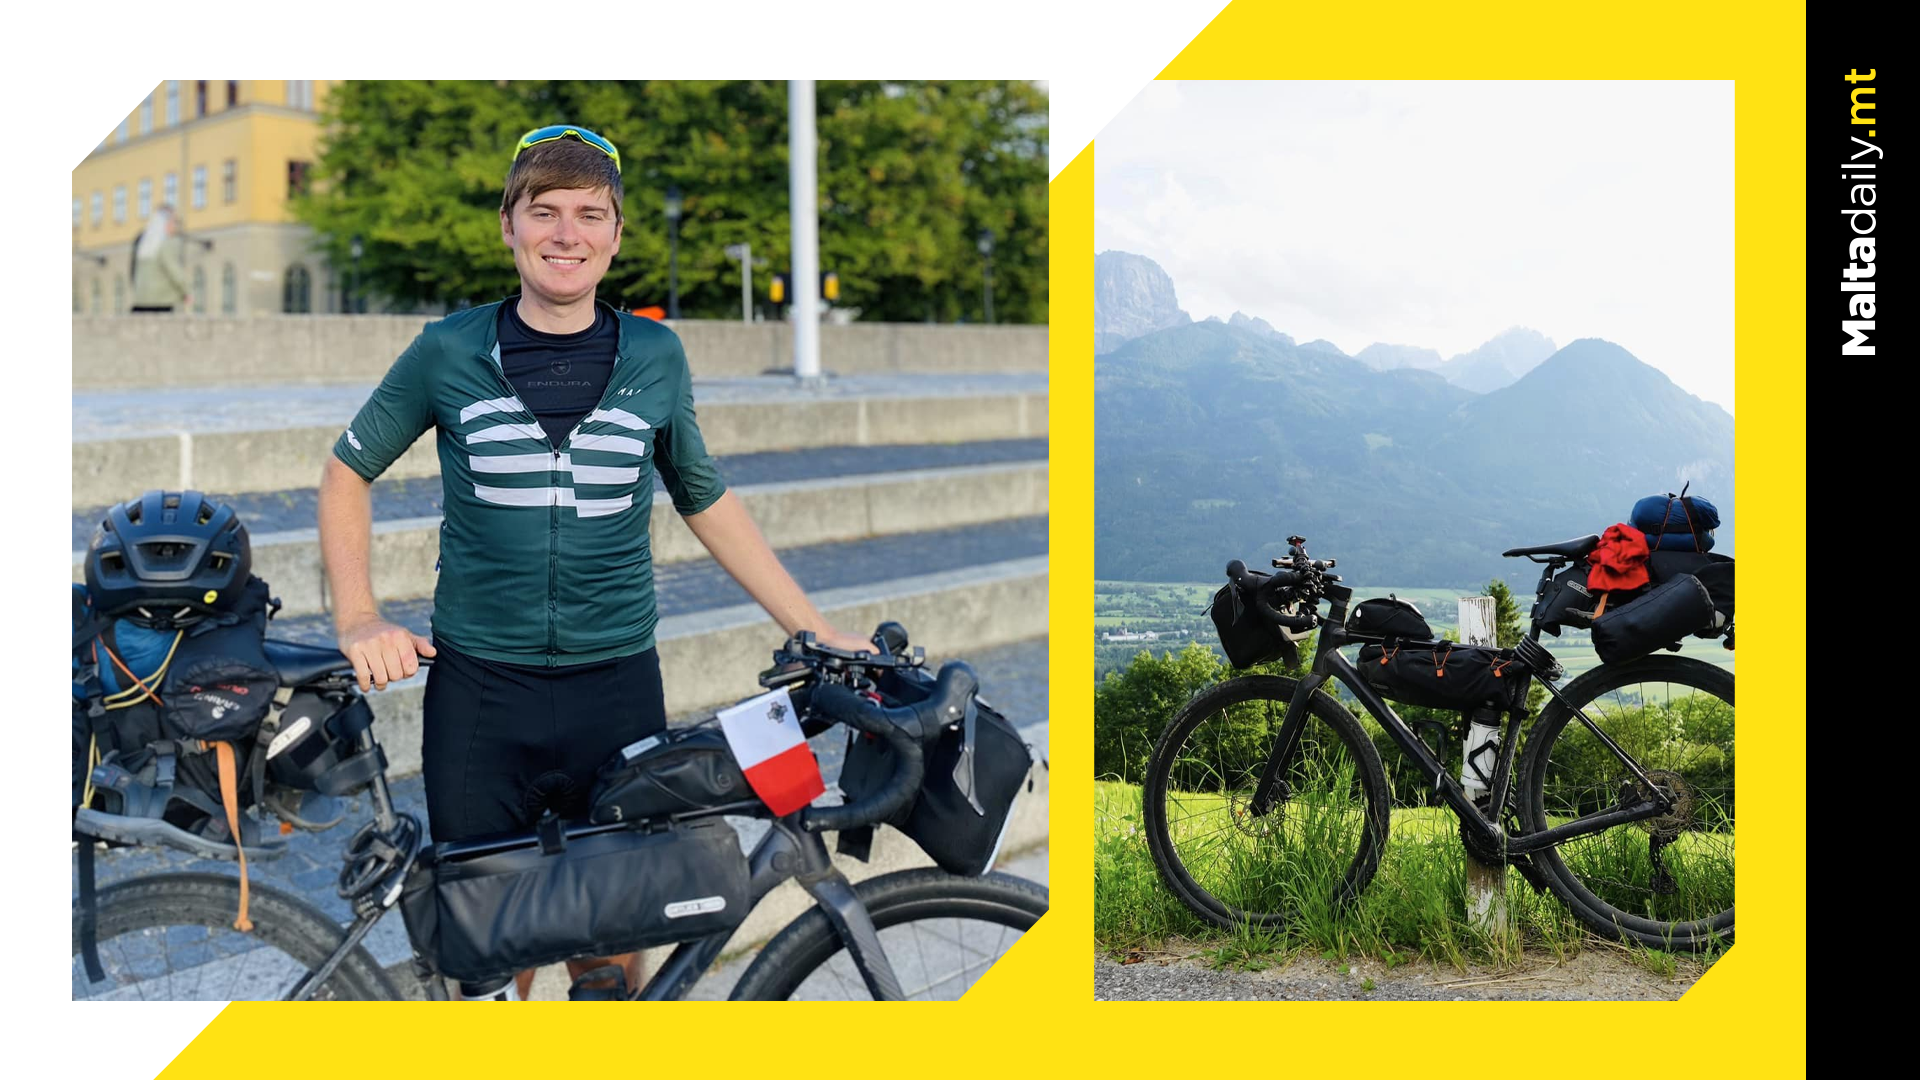 Steve Zammit Lupi Cycles from Malta to Sweden in 41 Days